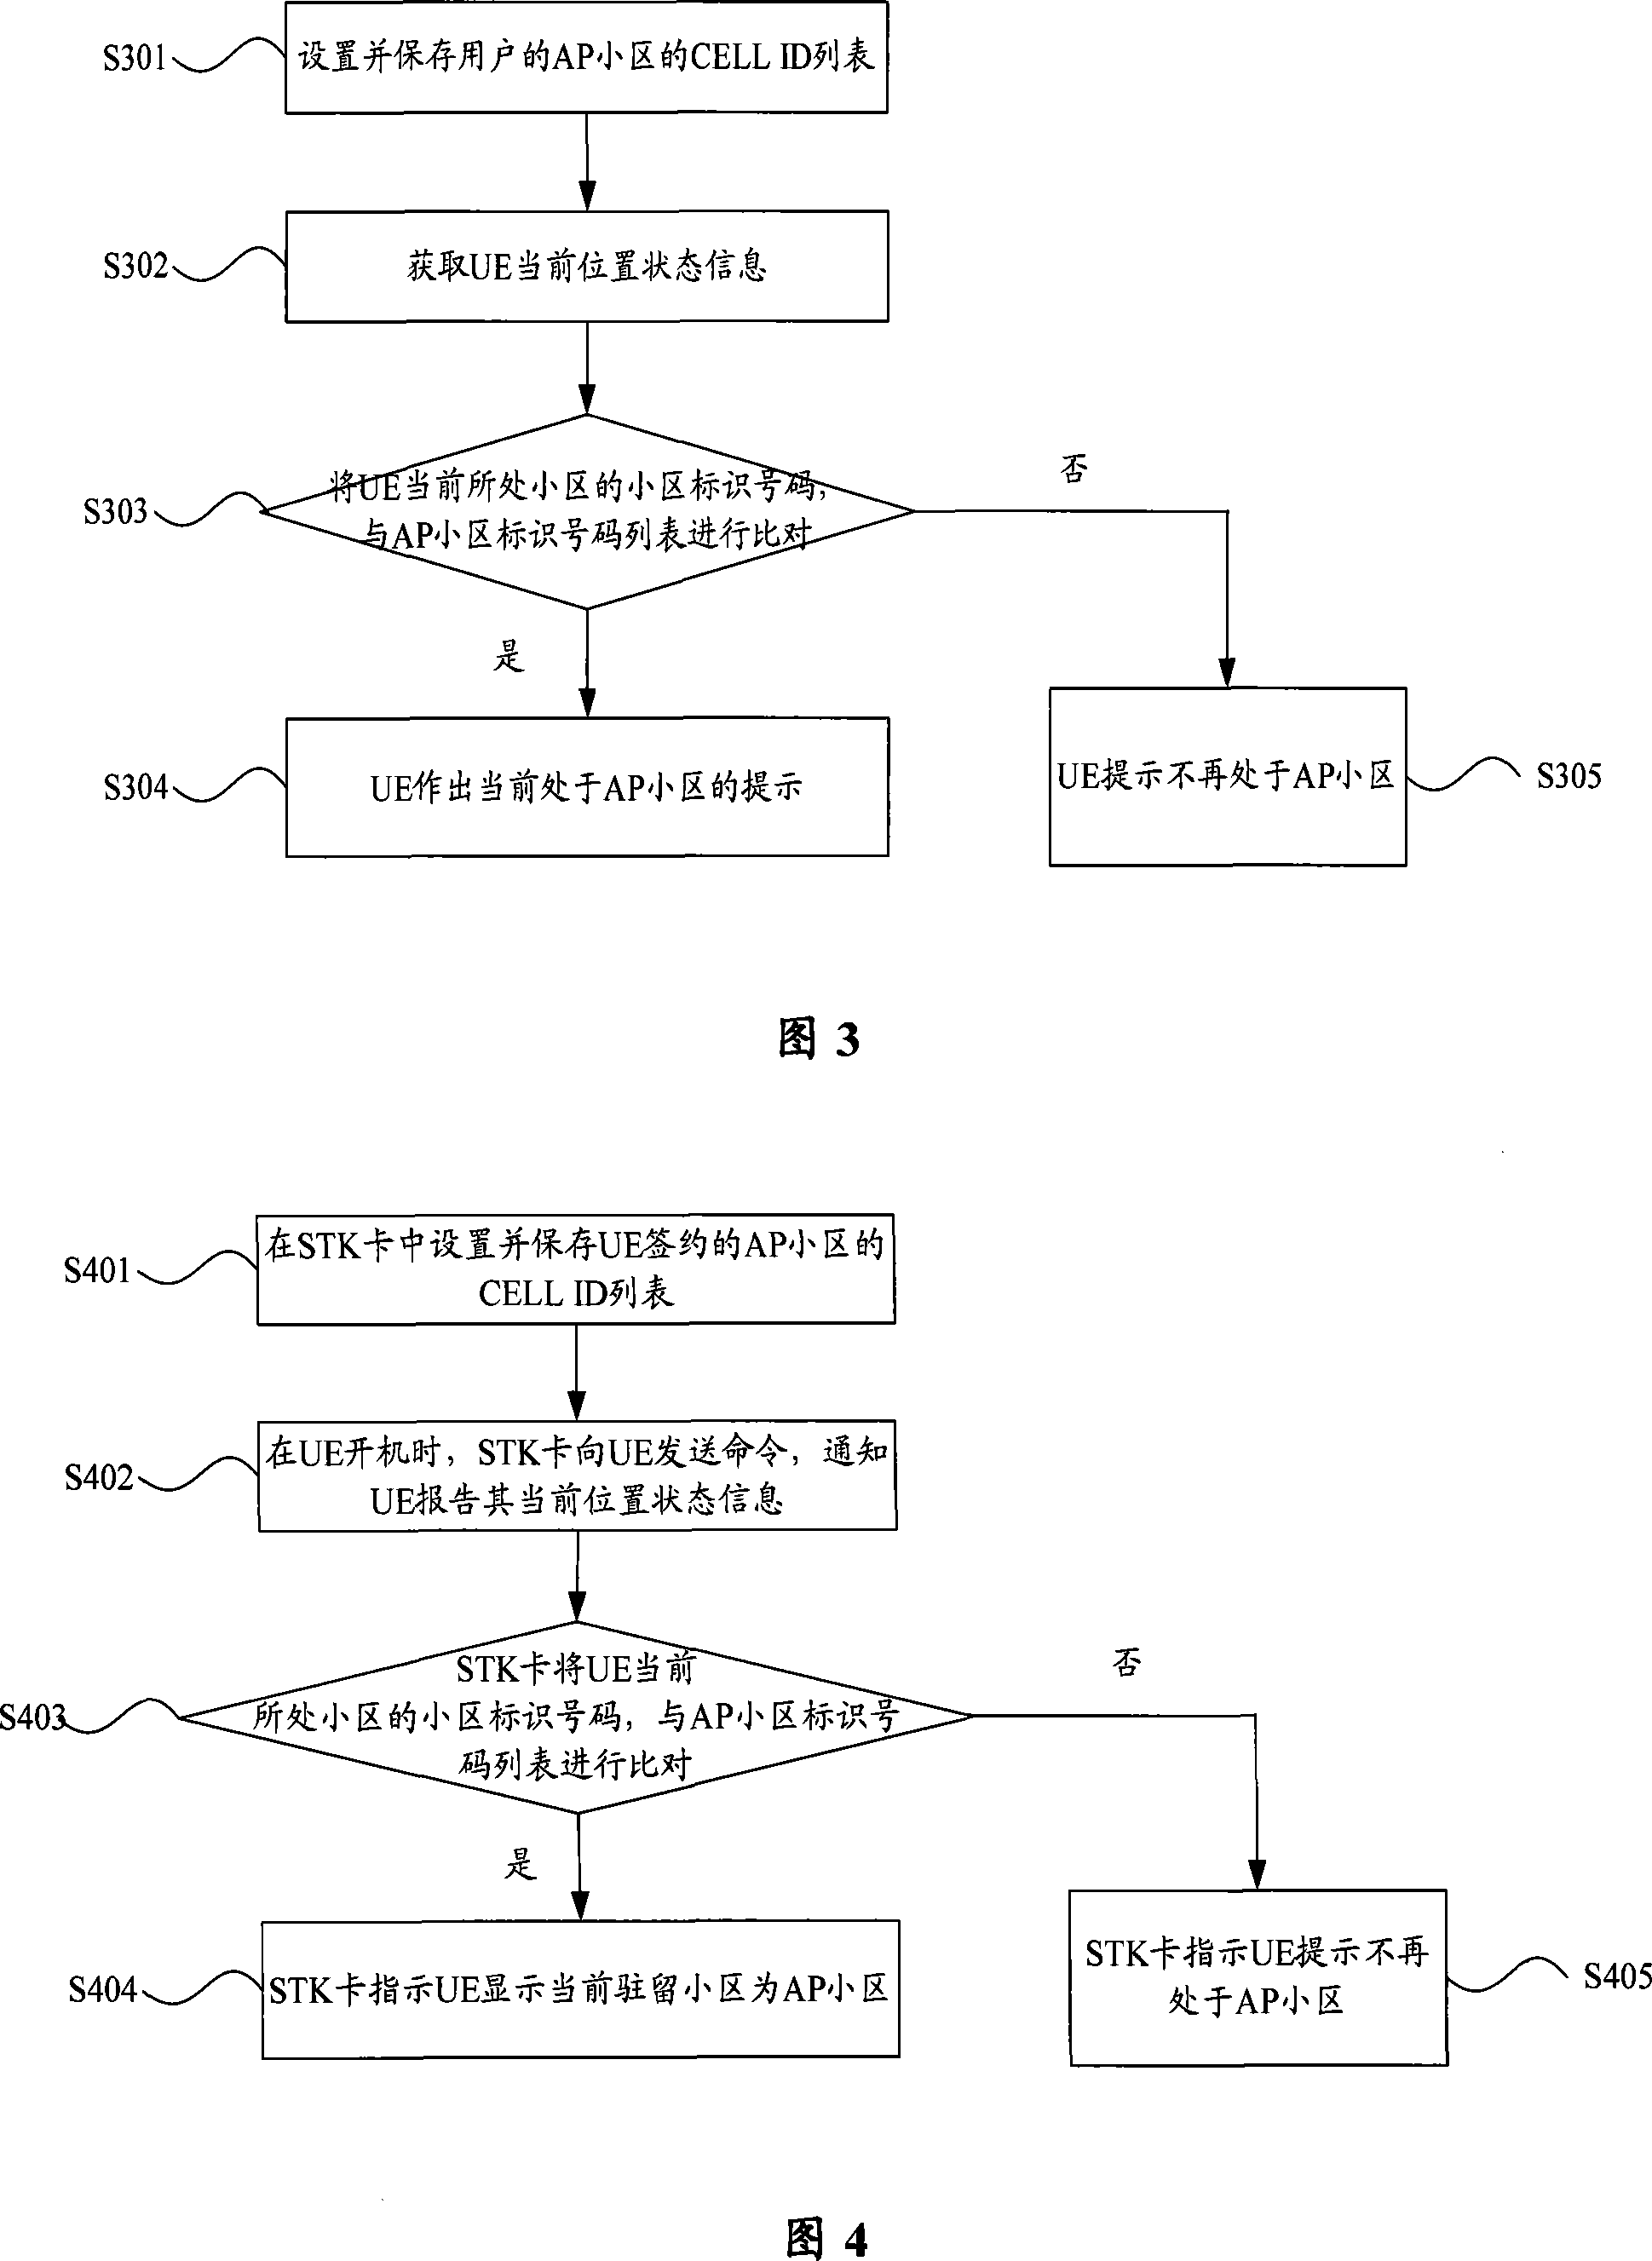 Method and device for reminding subscriber terminal of being in AP subdistrict